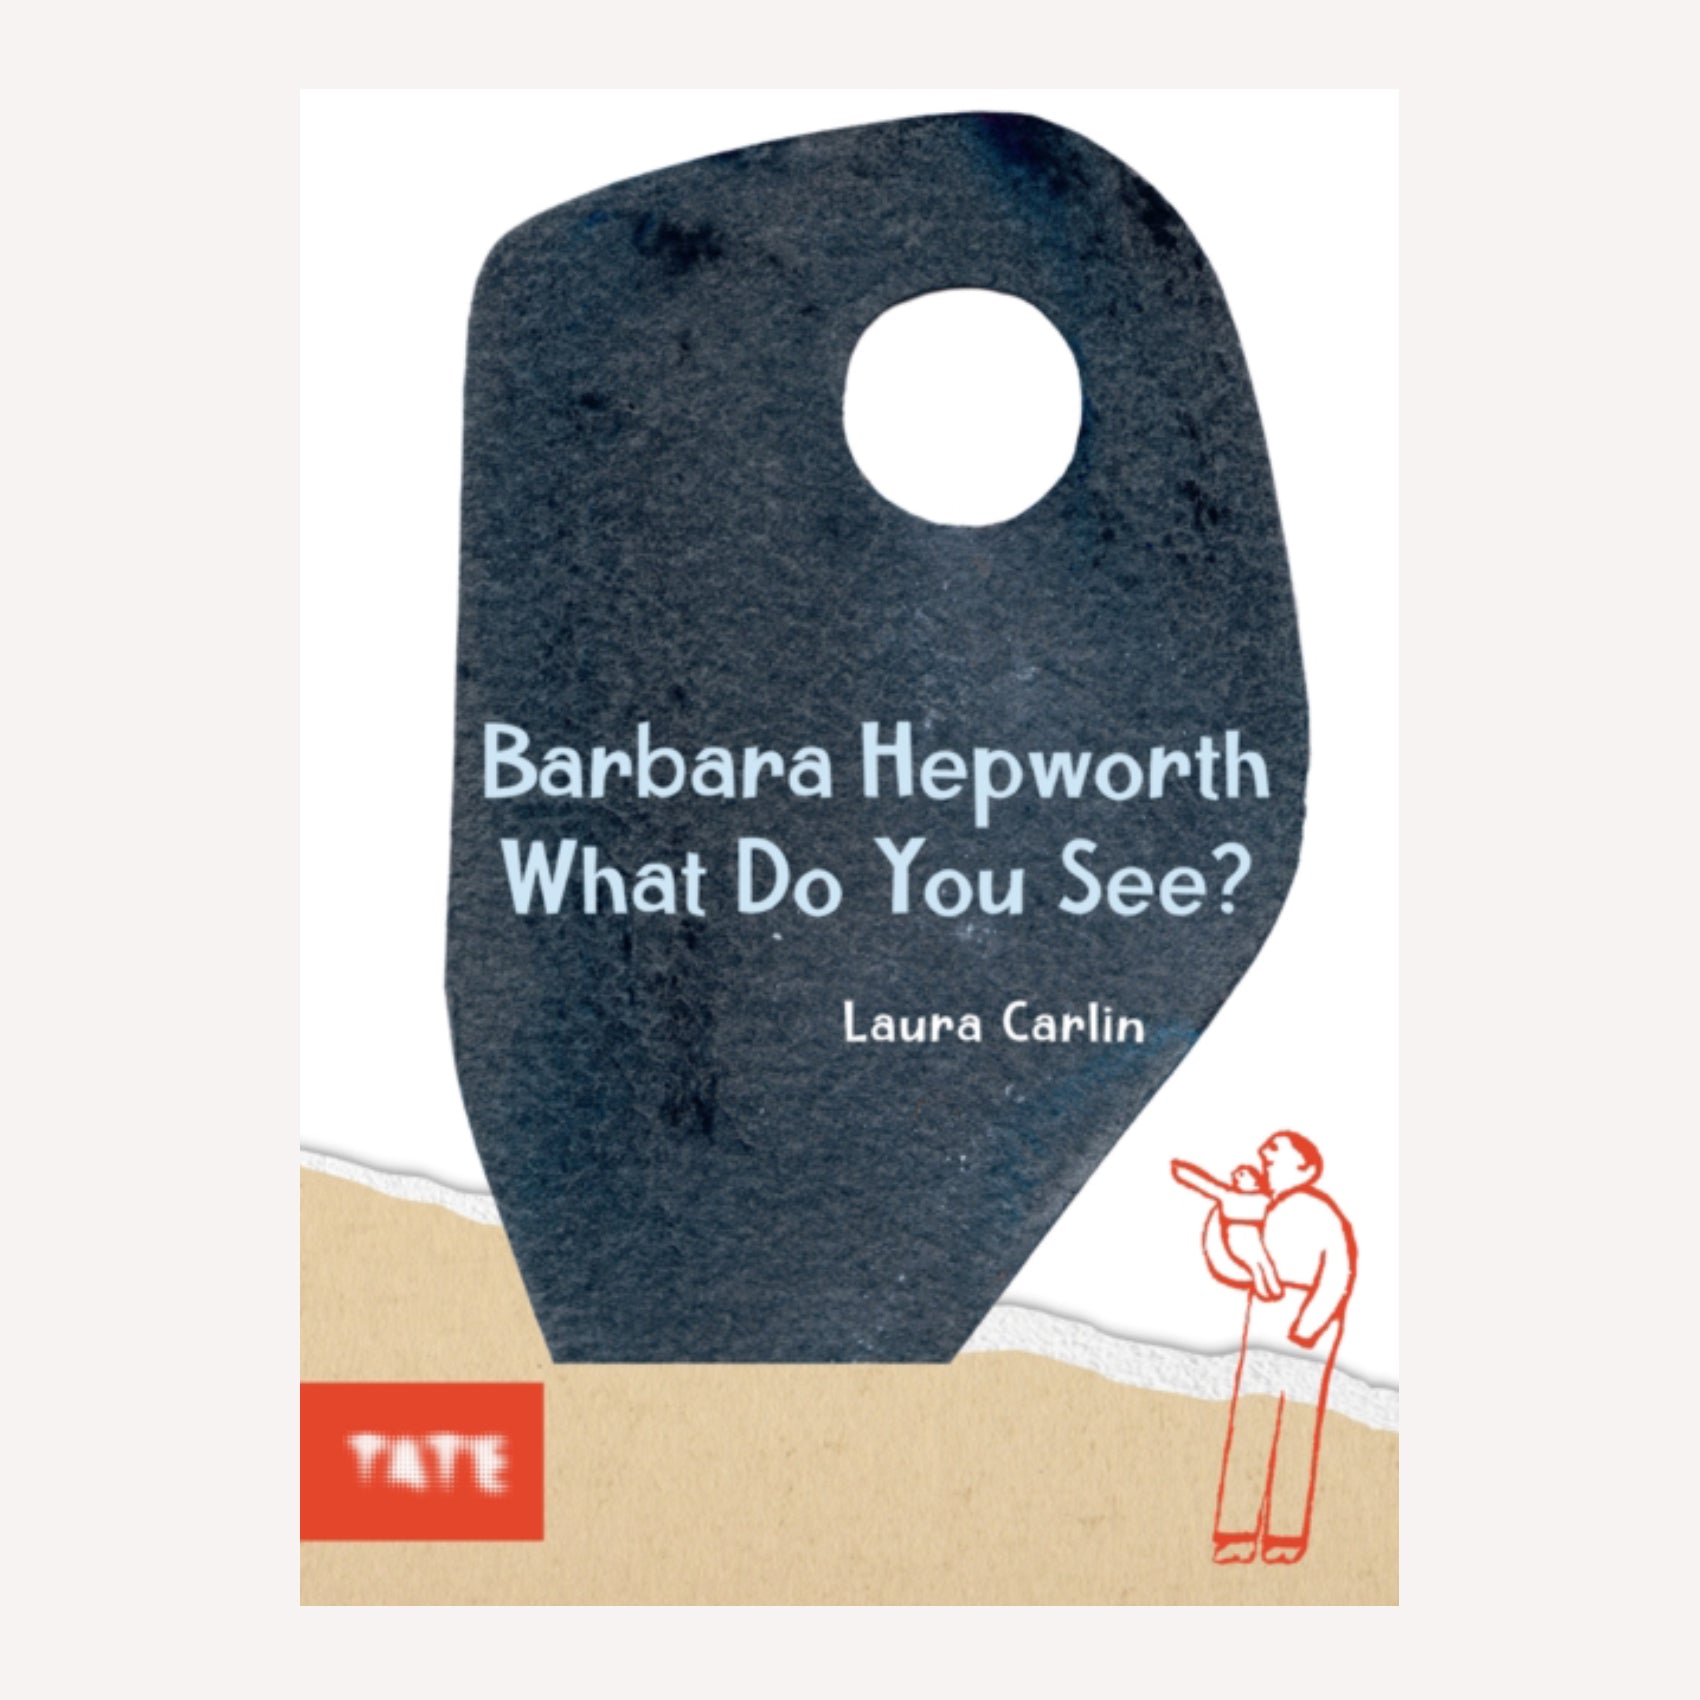 Book cover titled “Barbara Hepworth: What Do You See” by Laura Carlin. The cover features an illustration inspired by Hepworth’s sculptural works. 